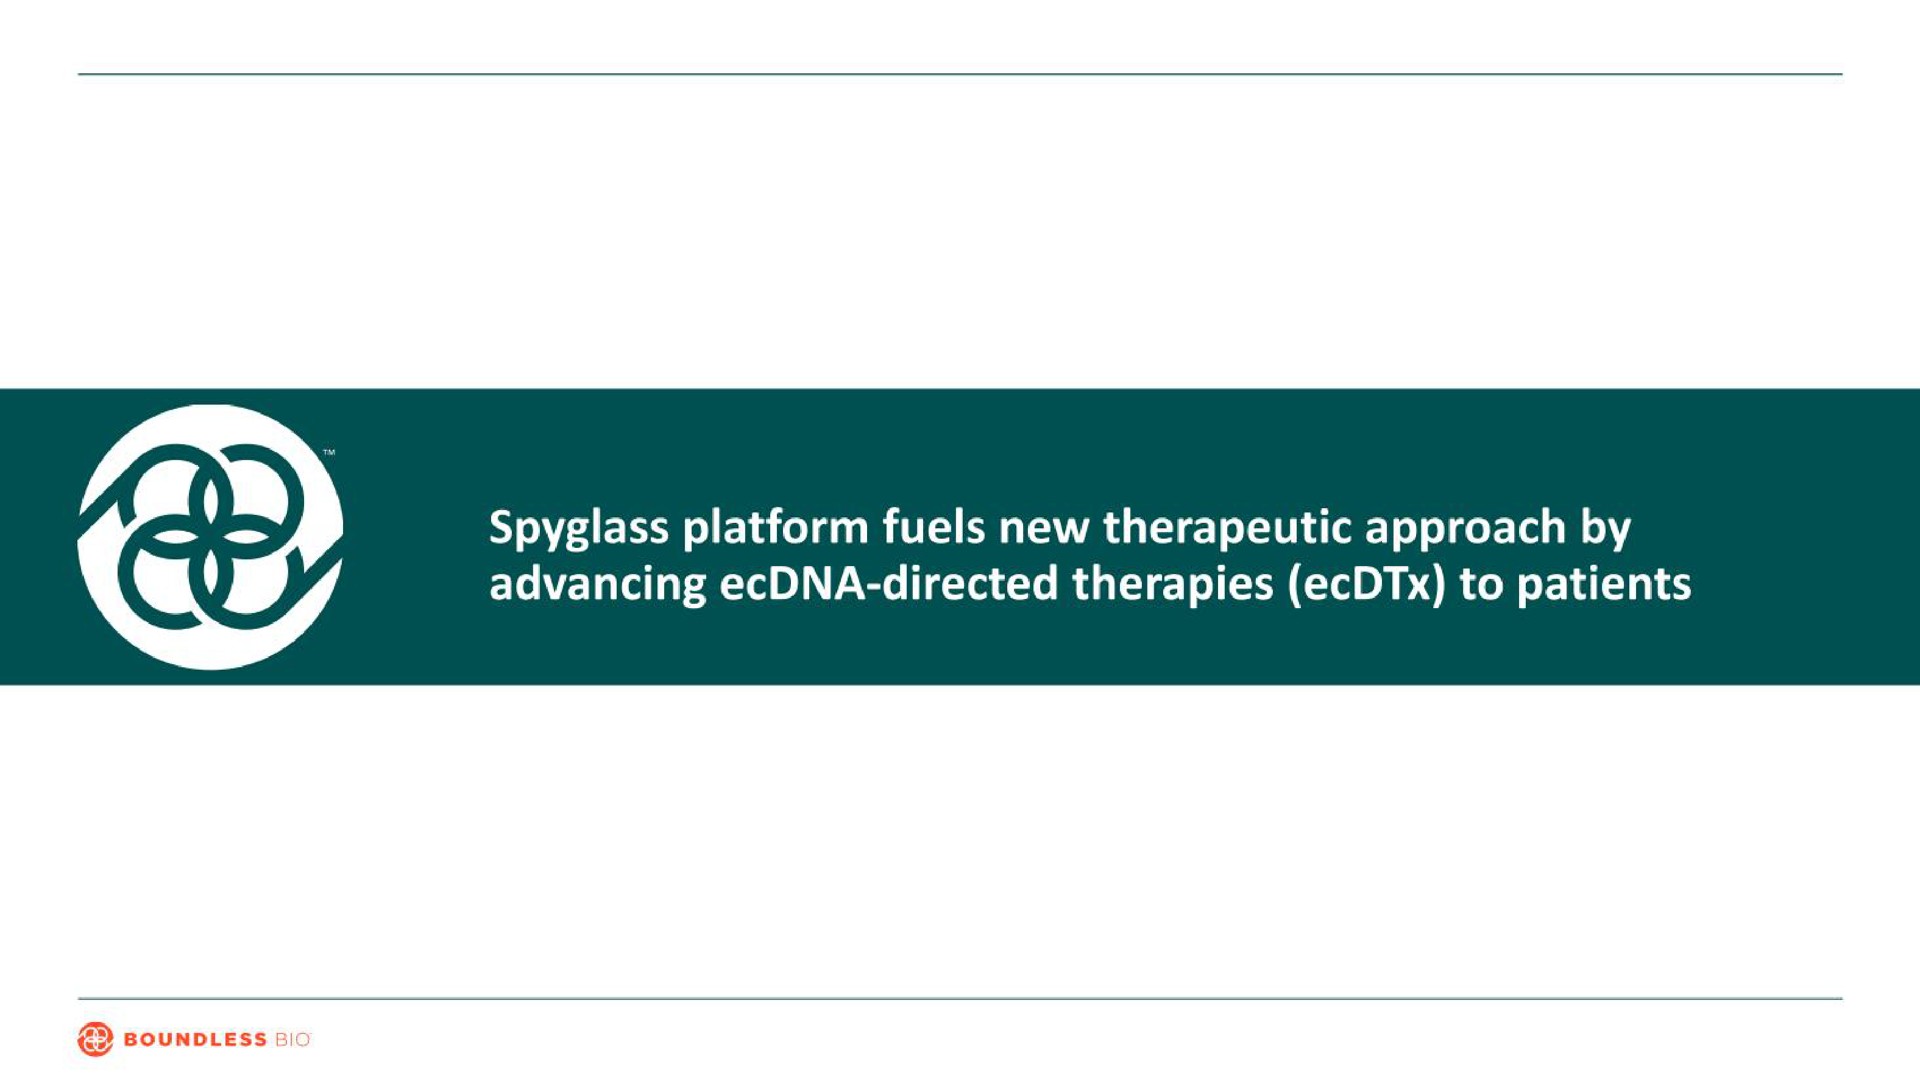 spyglass platform fuels new therapeutic approach by advancing directed therapies to patients | Boundless Bio